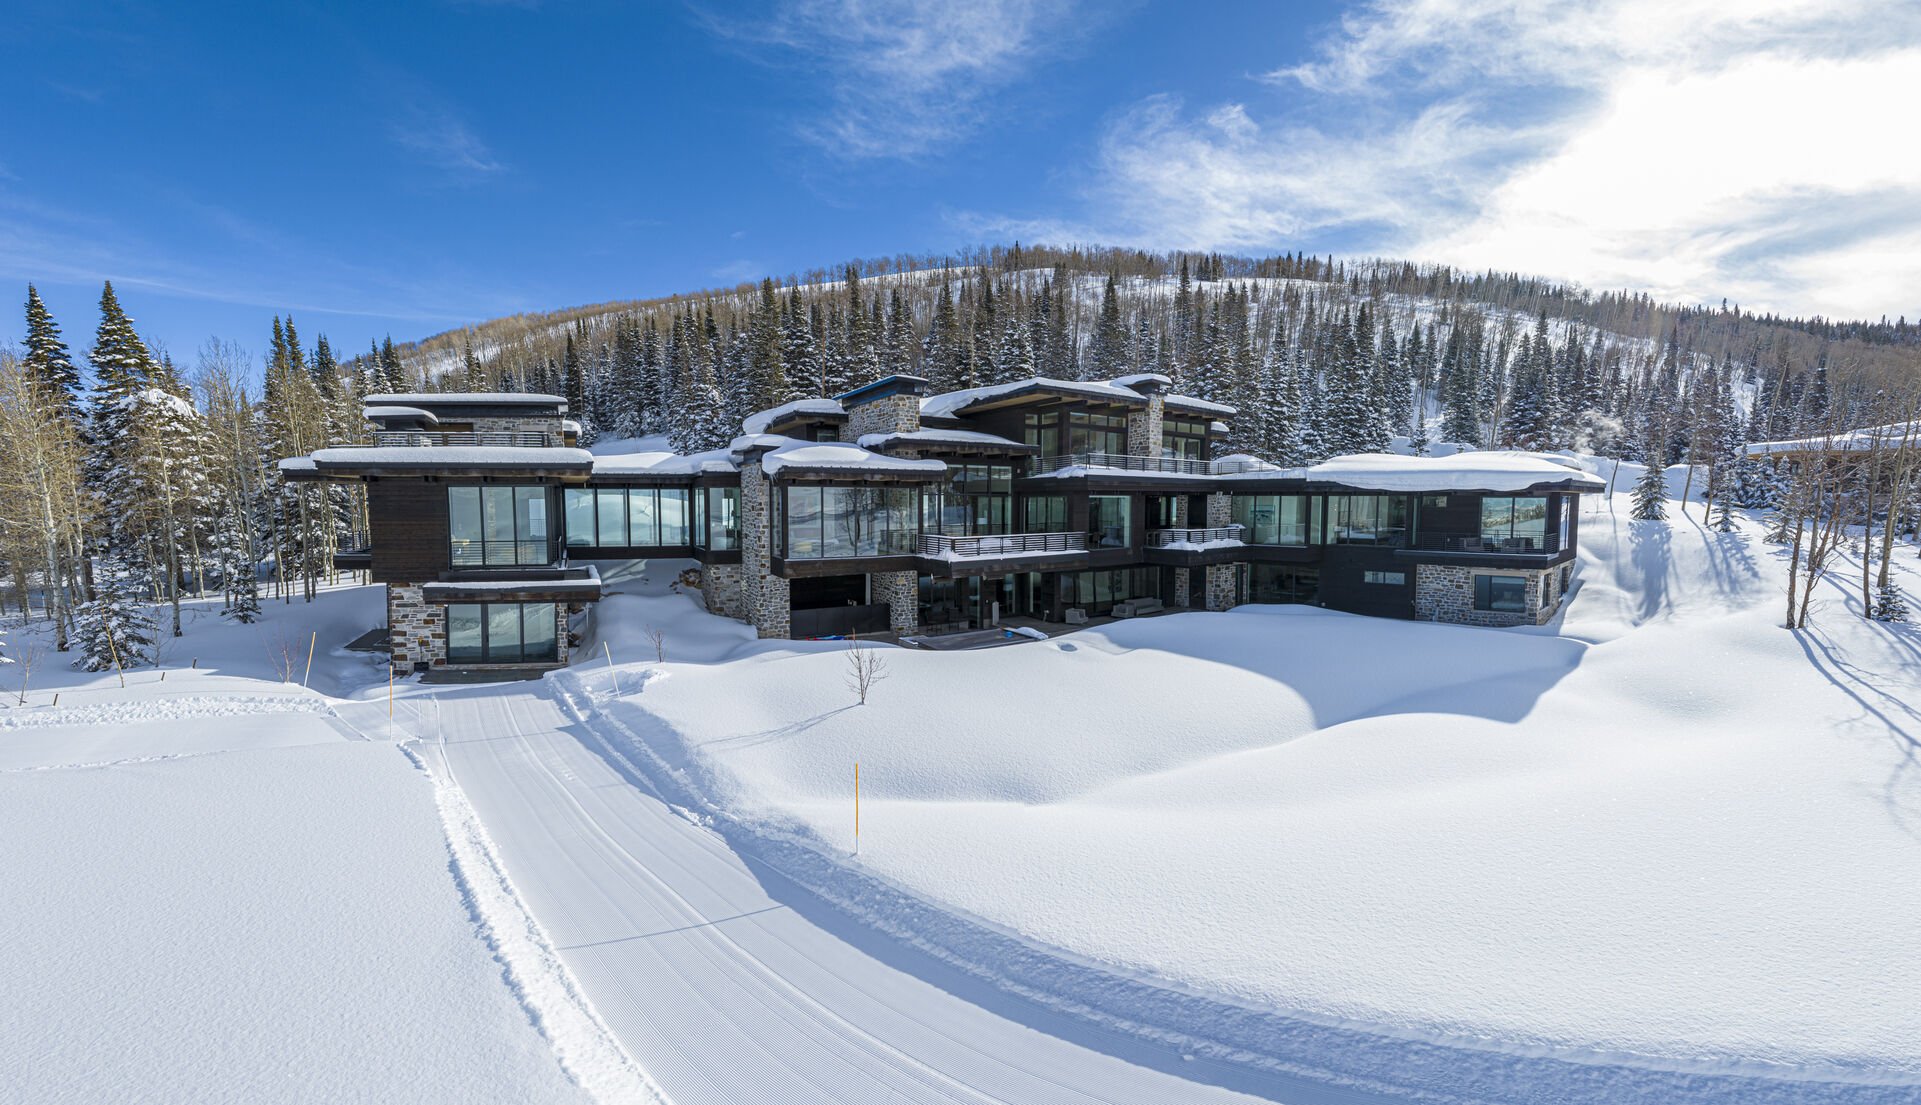 Ski-in/ski-out 15,000 square foot home in the Colony